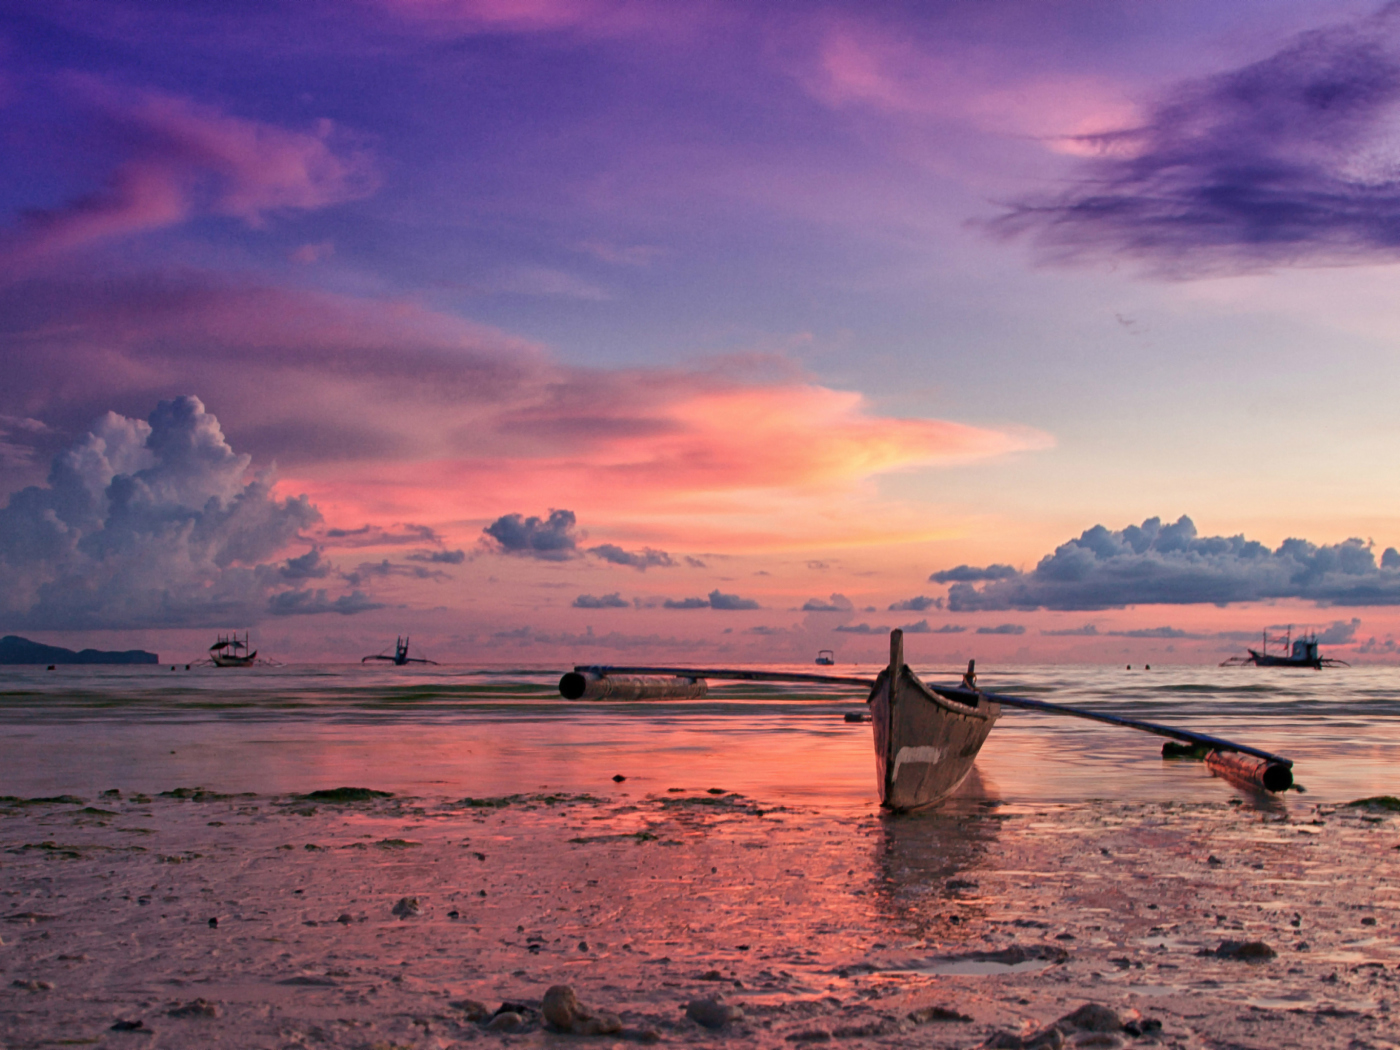 Pink Sunset And Boat At Beach In Philippines wallpaper 1400x1050